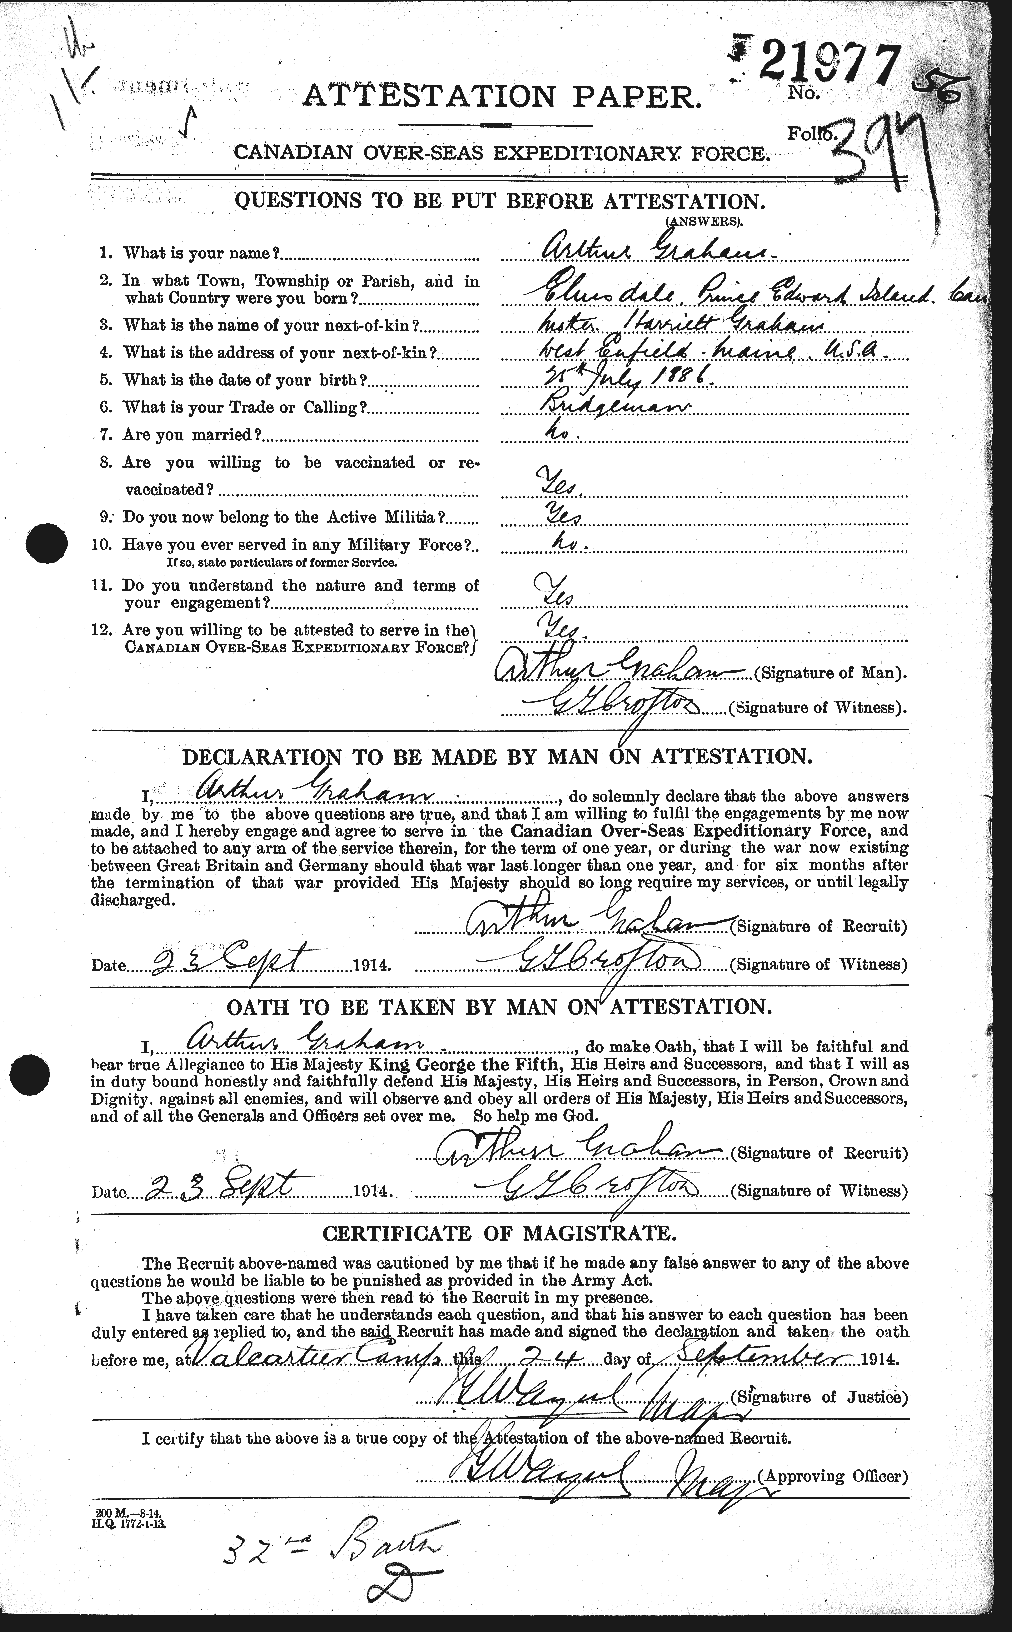 Personnel Records of the First World War - CEF 359650a